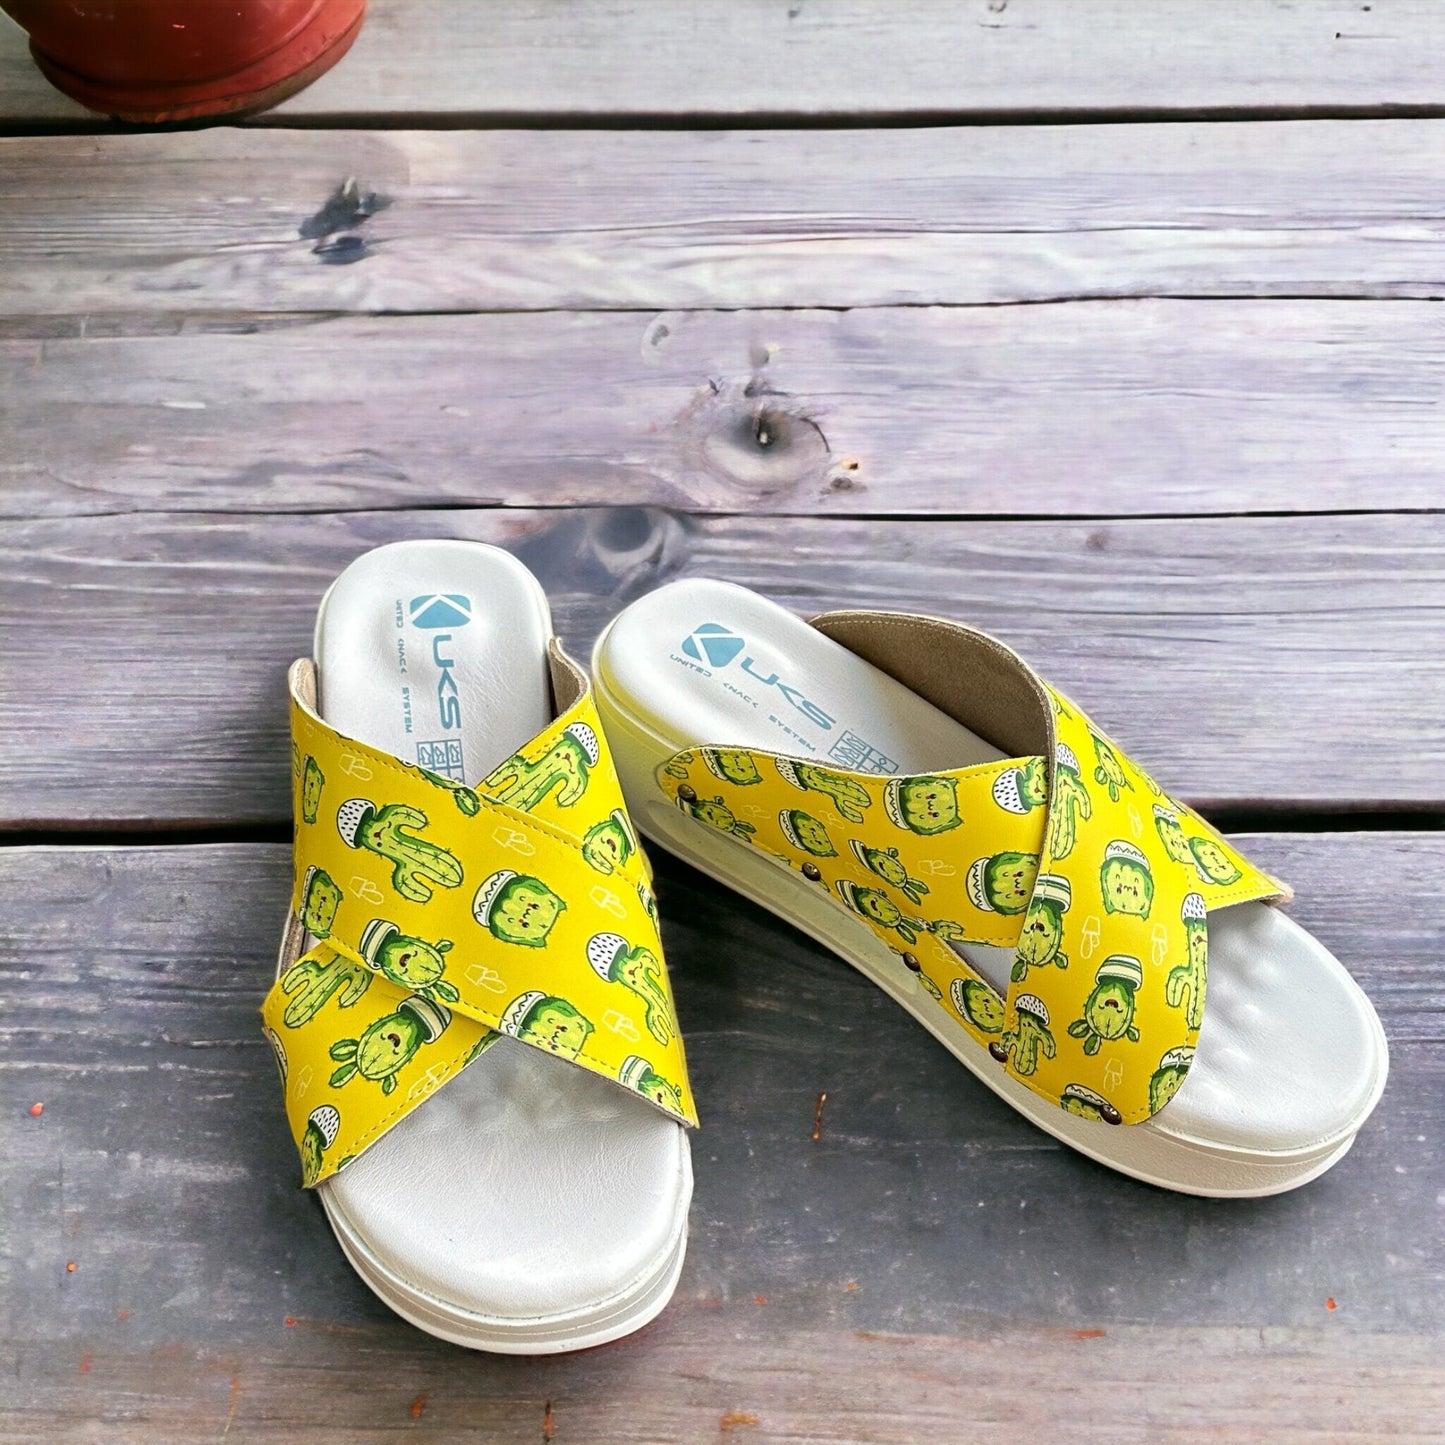 Cactus Pattern Cross Band Air Clogx Leather Slippers Clogs Sandals